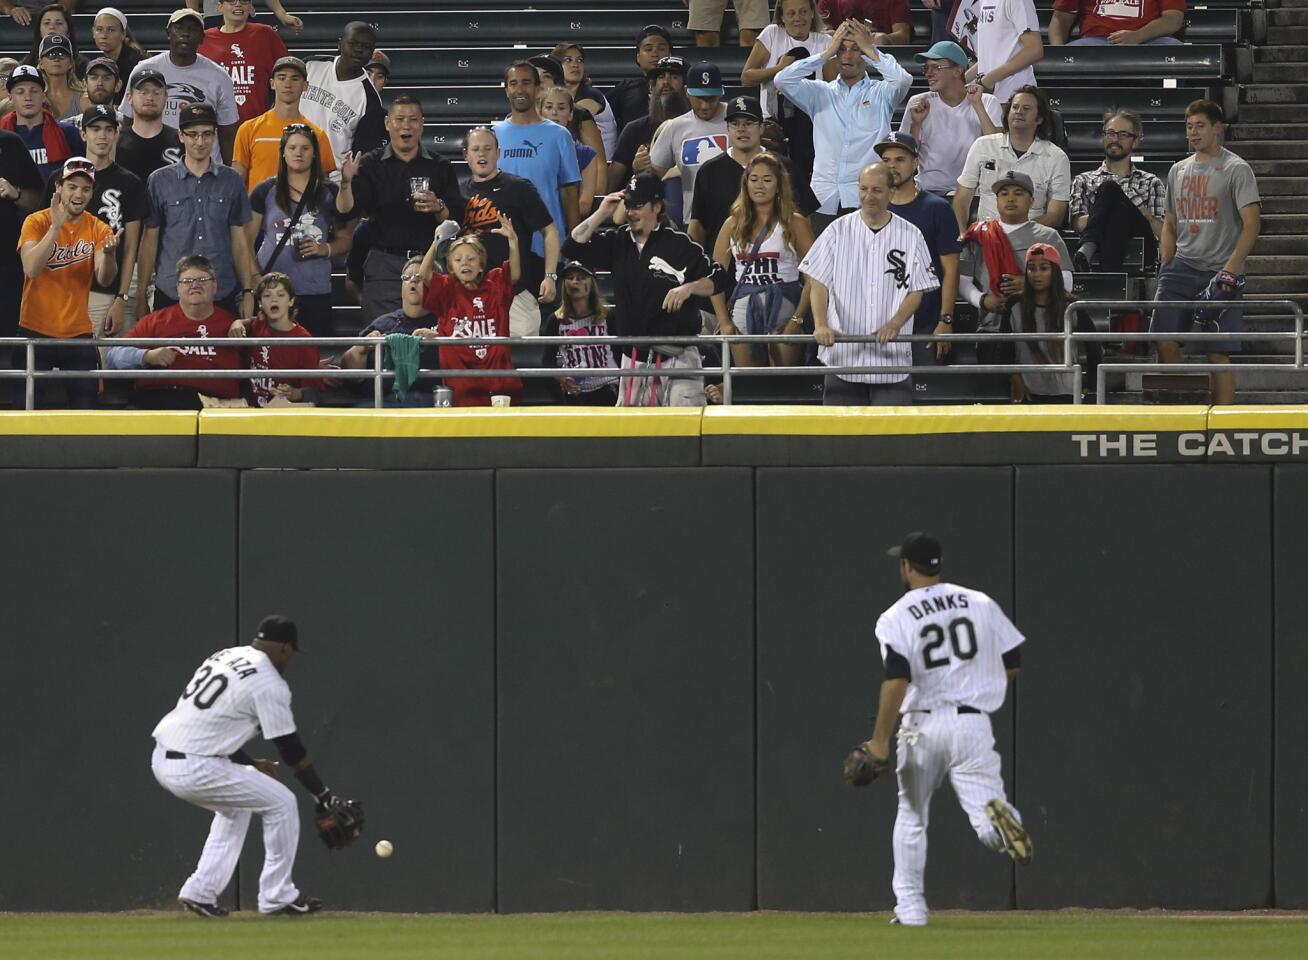 Fans in left field react to the three-run double hit by the Orioles' Jonathan Schoop during the eighth inning.